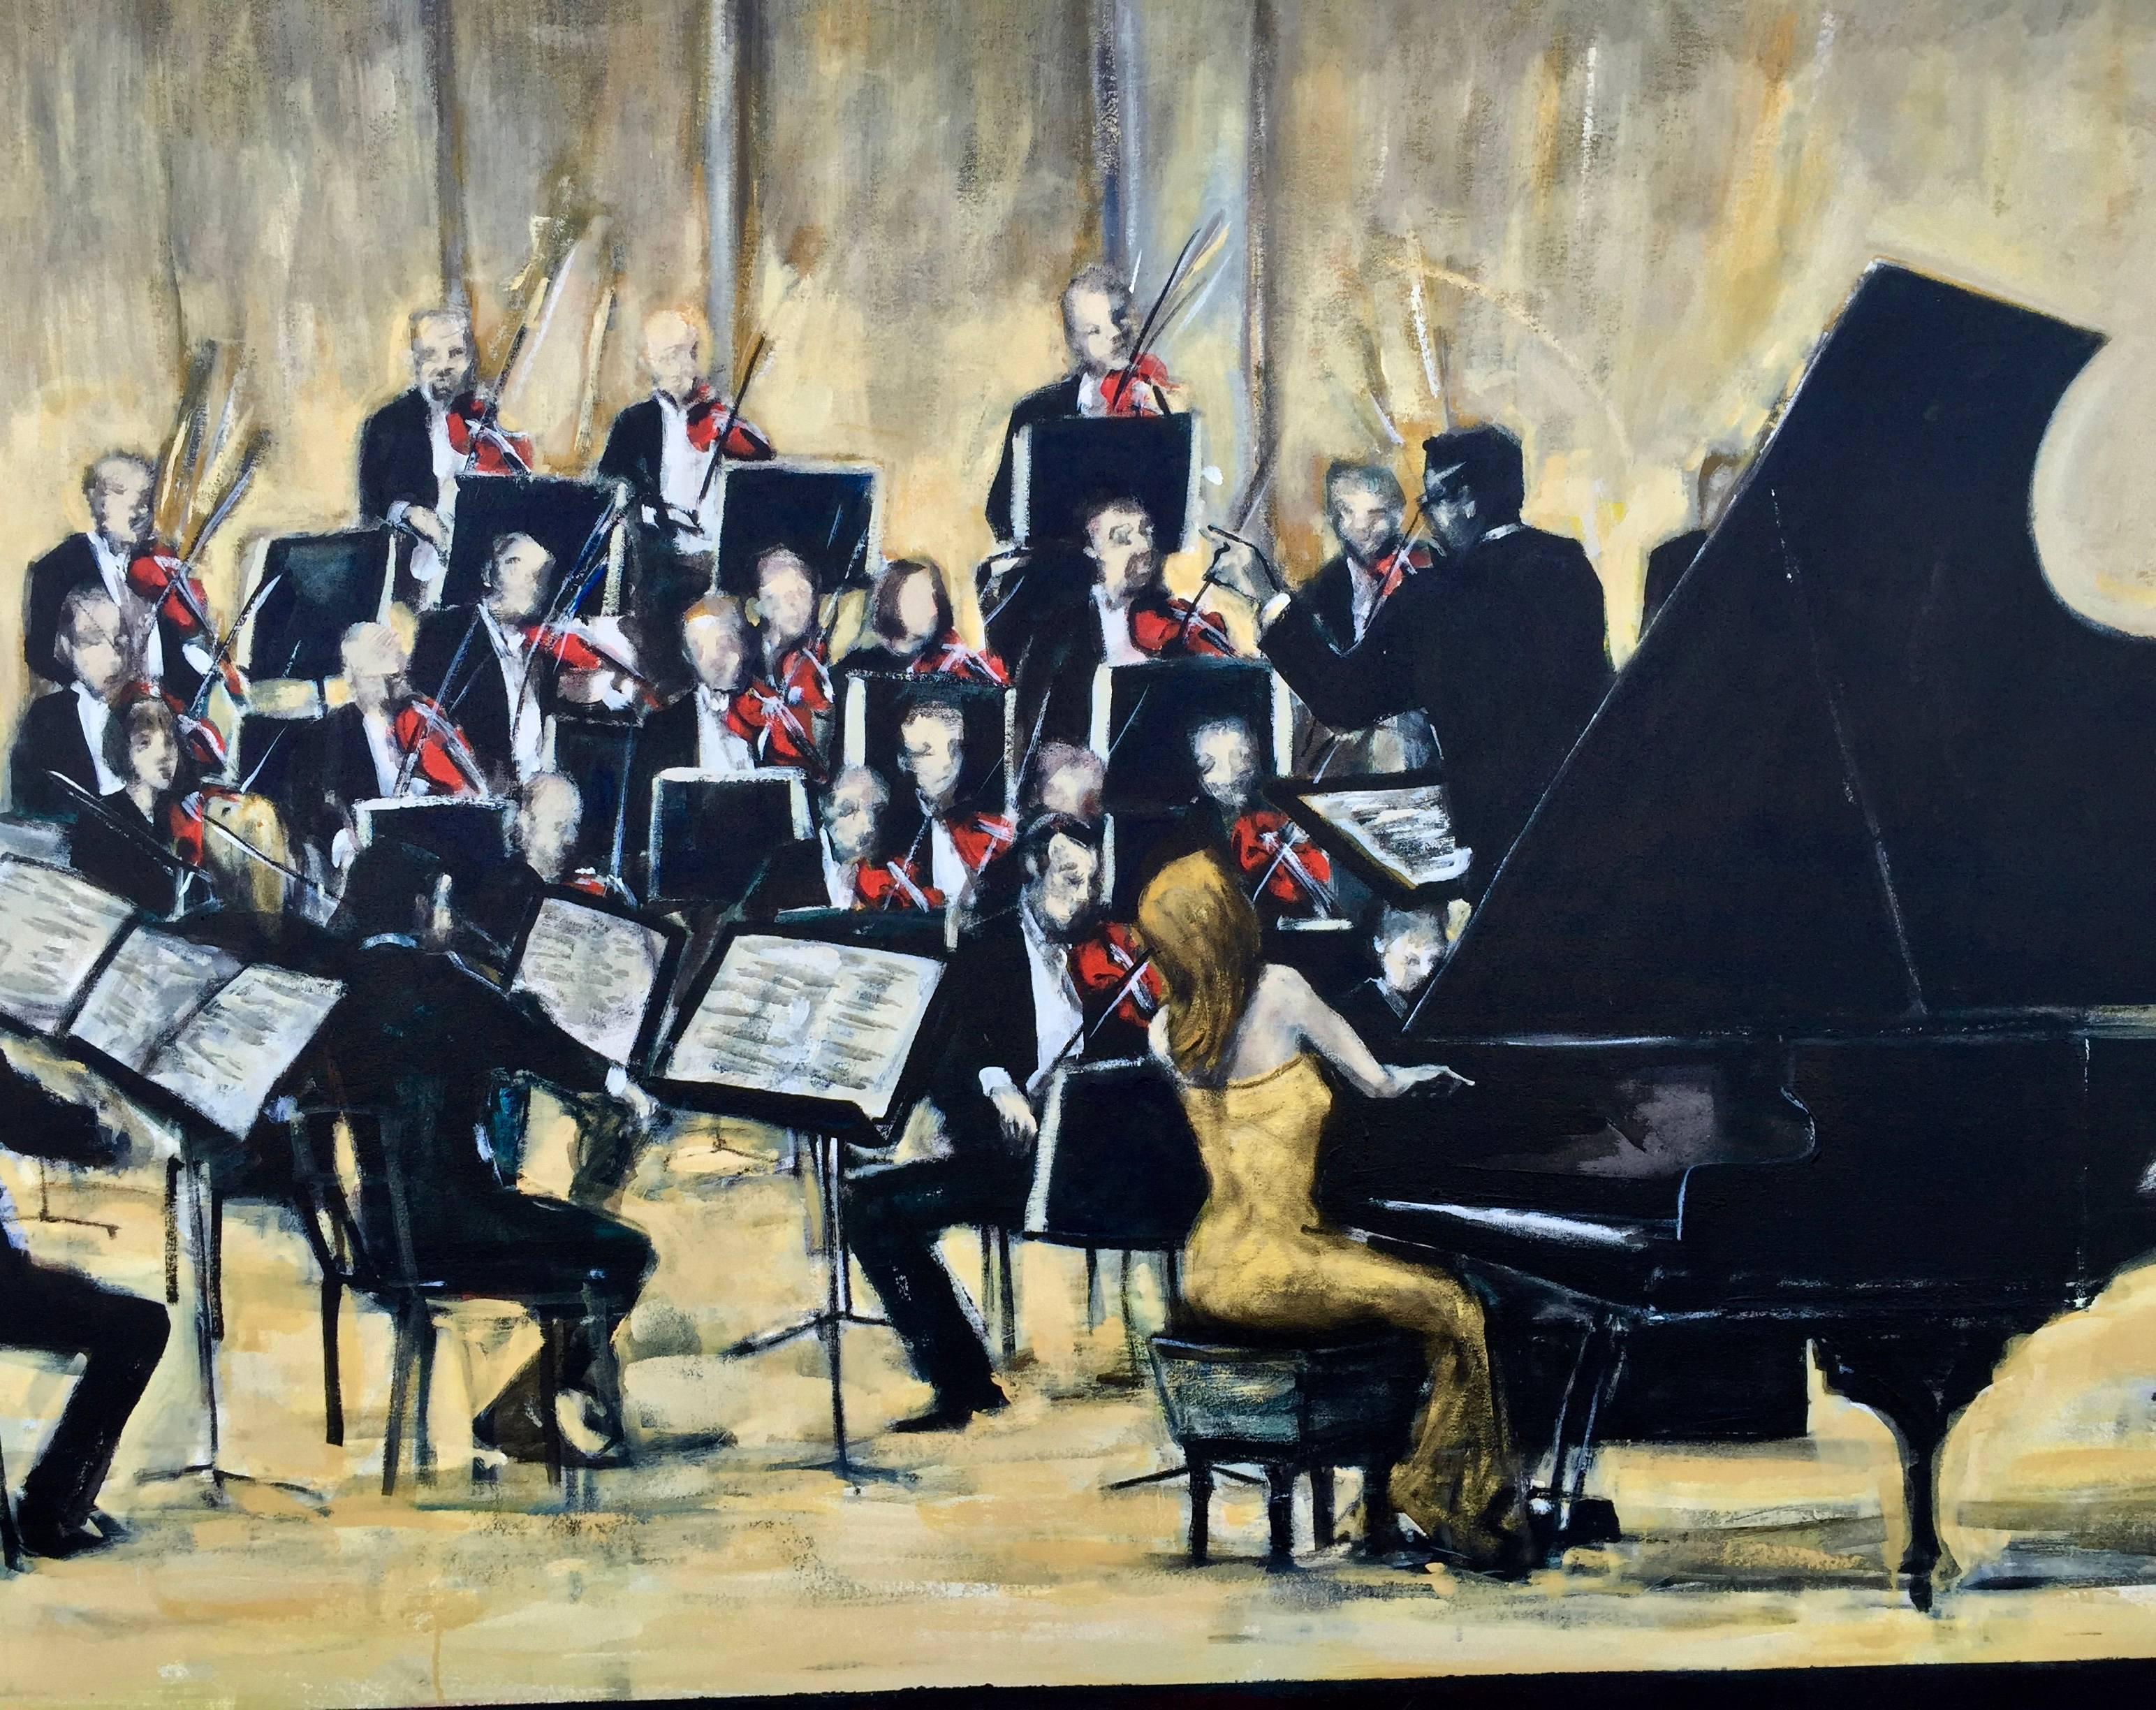 An absolutely magnificent painting by the noted Mexican Artist Ernesto Seco (1958-2011). This orchestral scene was commissioned by our client. It is Large approximately 77.5 inched by 55.5 inches tall and 1.5 inches wide. It is signed lower Right.